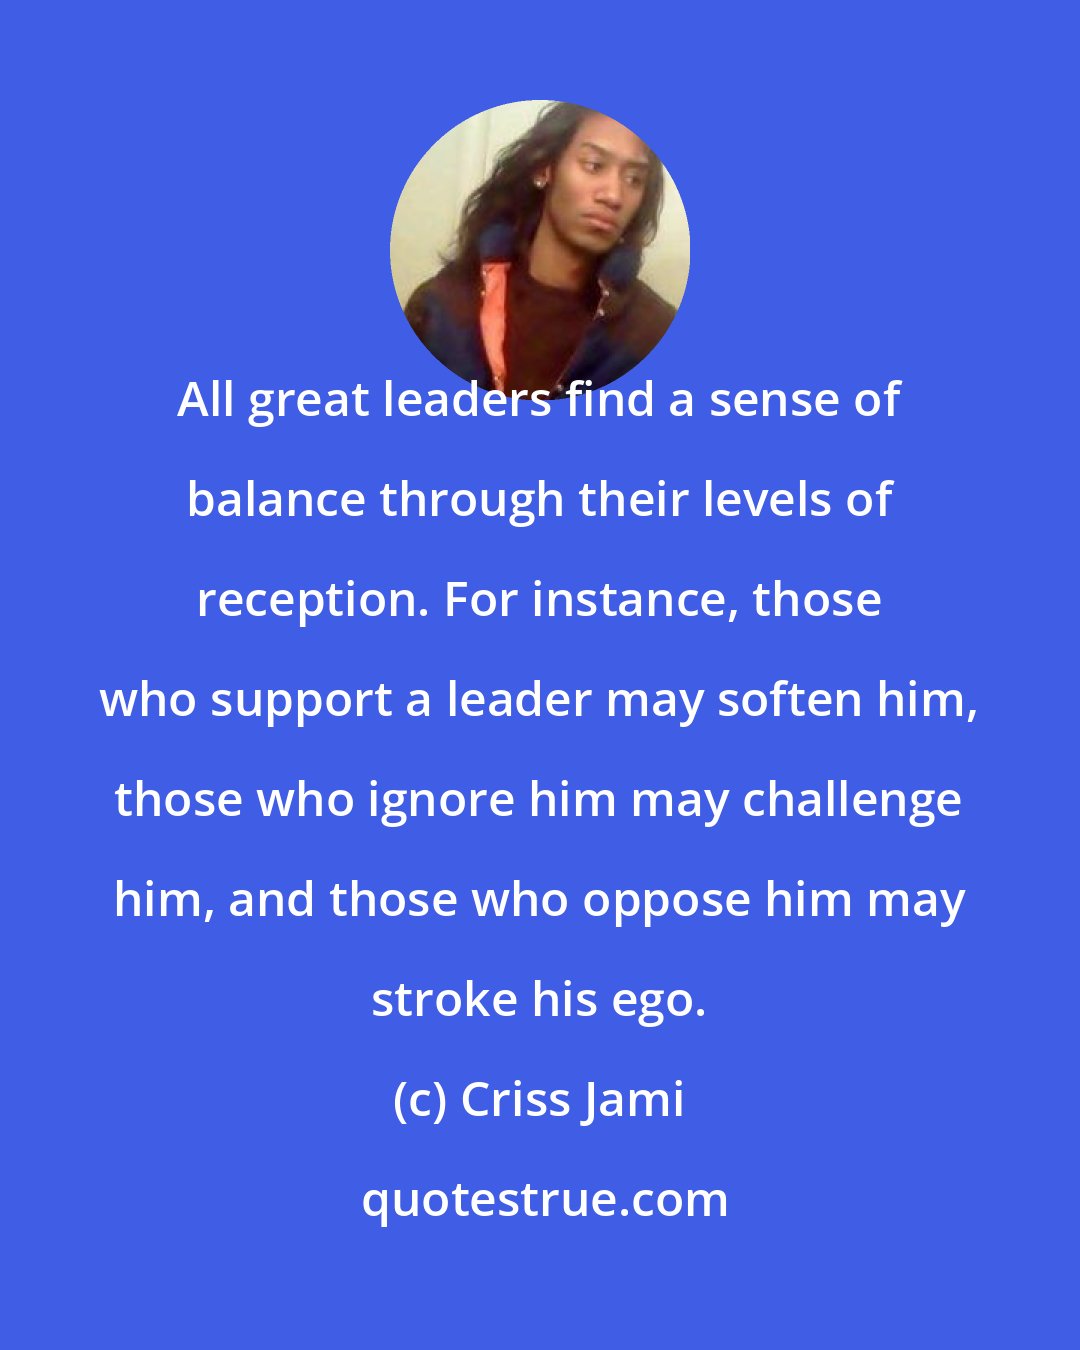 Criss Jami: All great leaders find a sense of balance through their levels of reception. For instance, those who support a leader may soften him, those who ignore him may challenge him, and those who oppose him may stroke his ego.